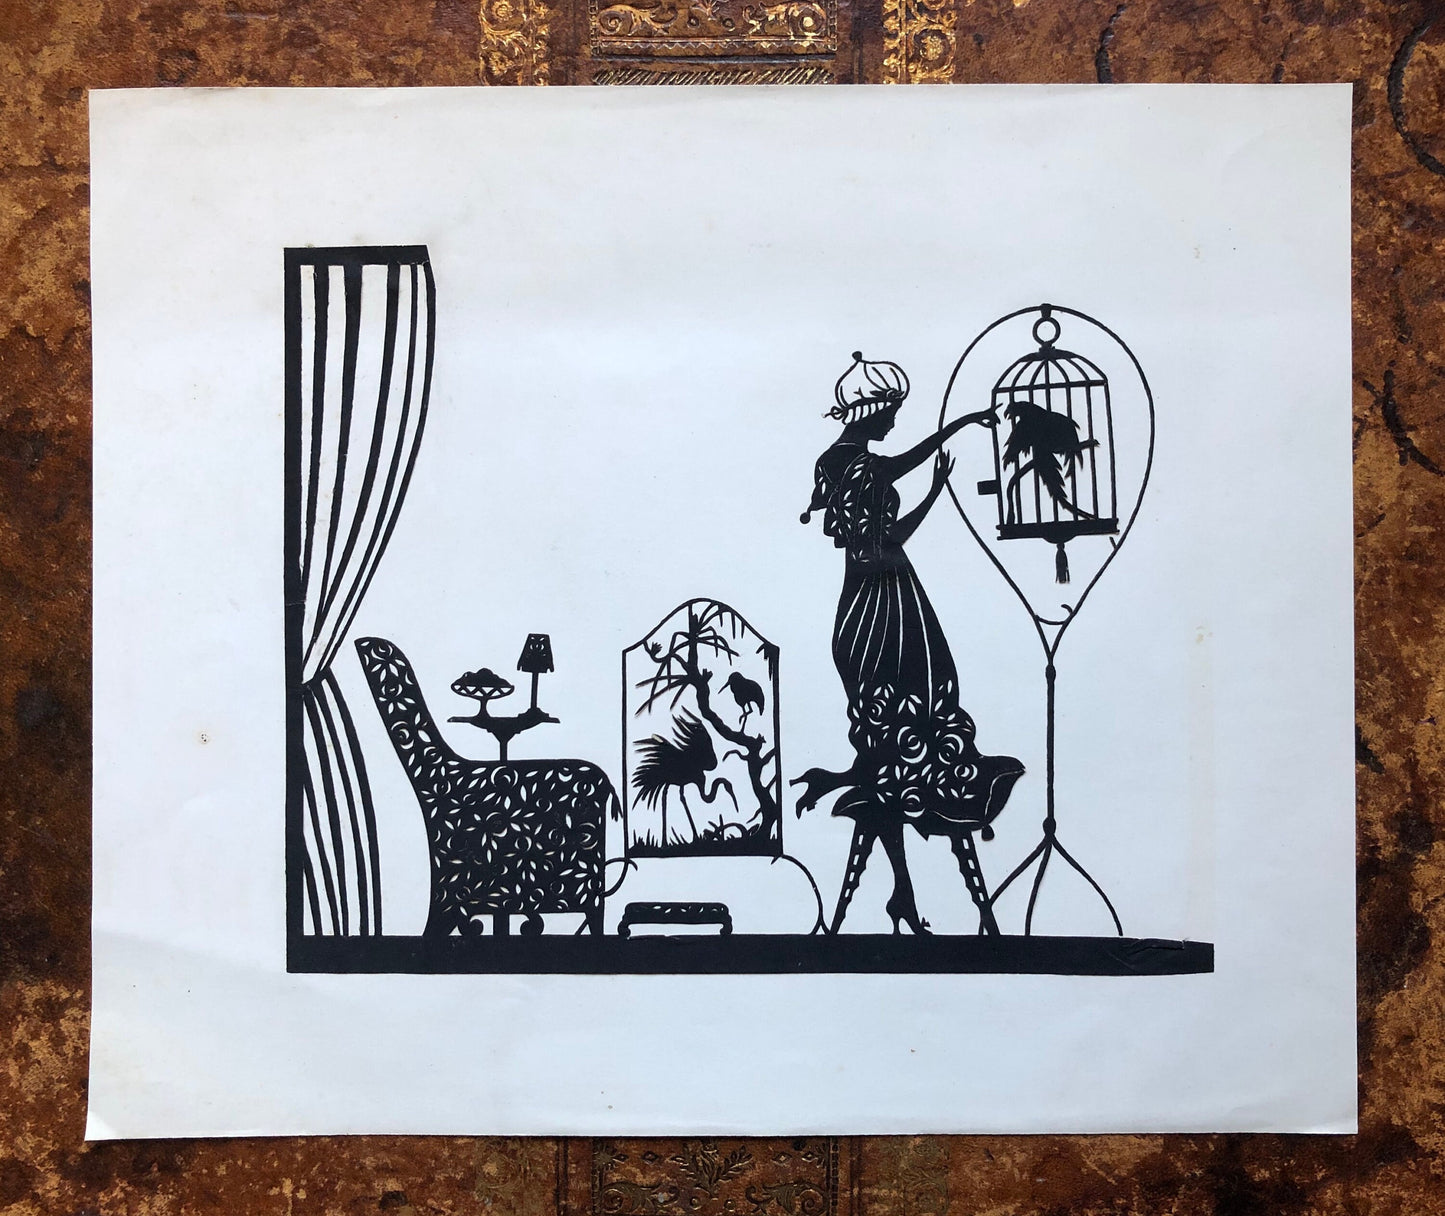 A Group of Eight Papercuts or Scherenschnitte by Gertrude Blecke. From the 1920’s. Various sizes. The largest is 31.5 x 24.5 cms.